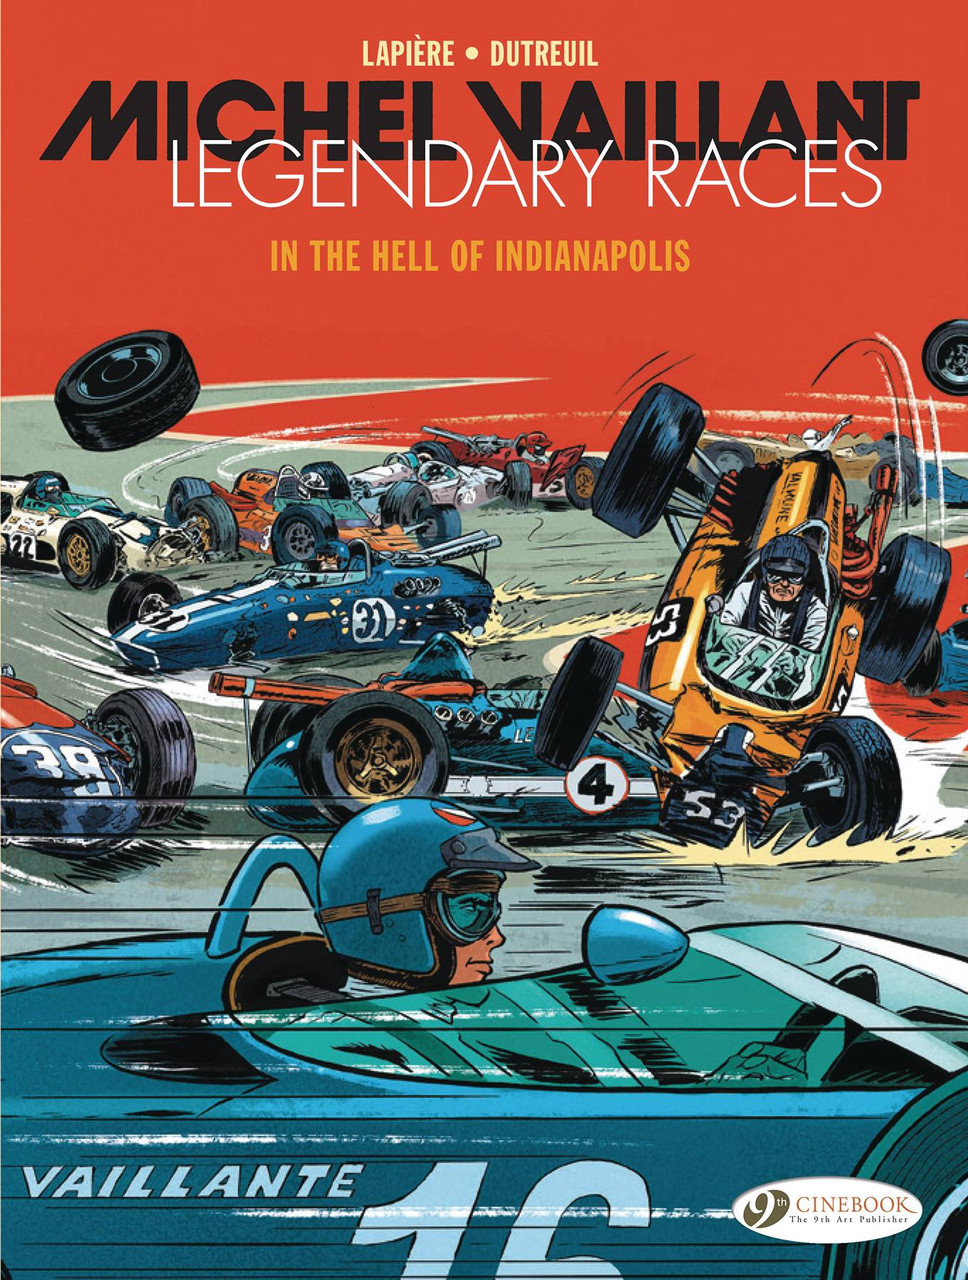 MICHEL VAILLANT LEGENDARY RACES GN VOL 01 IN THE HELL OF INDIANAPOLIS